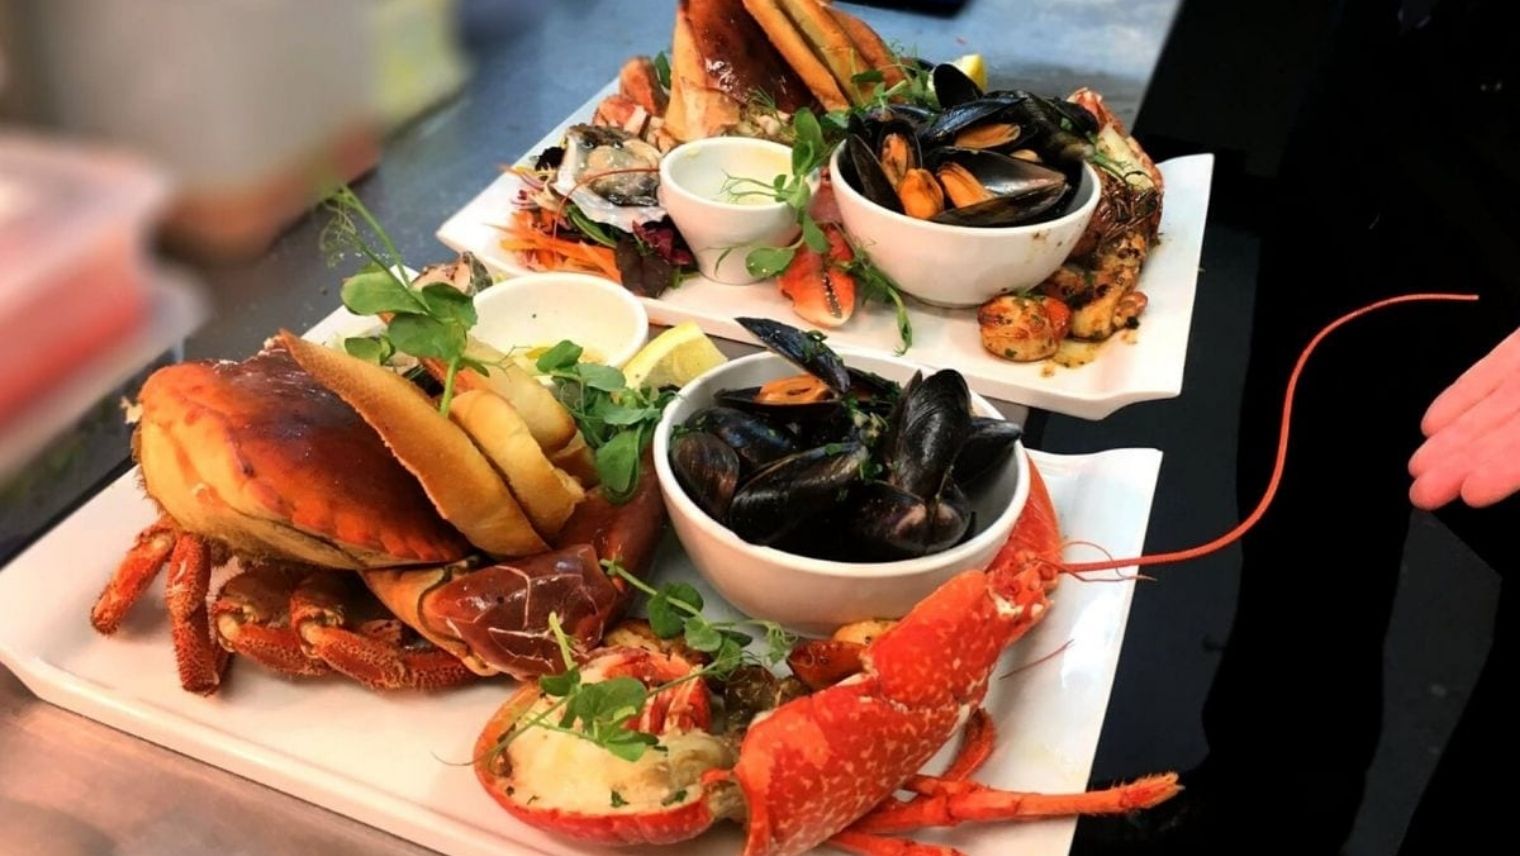 Cuisine dished up on a plate at Crustacean Weymouth